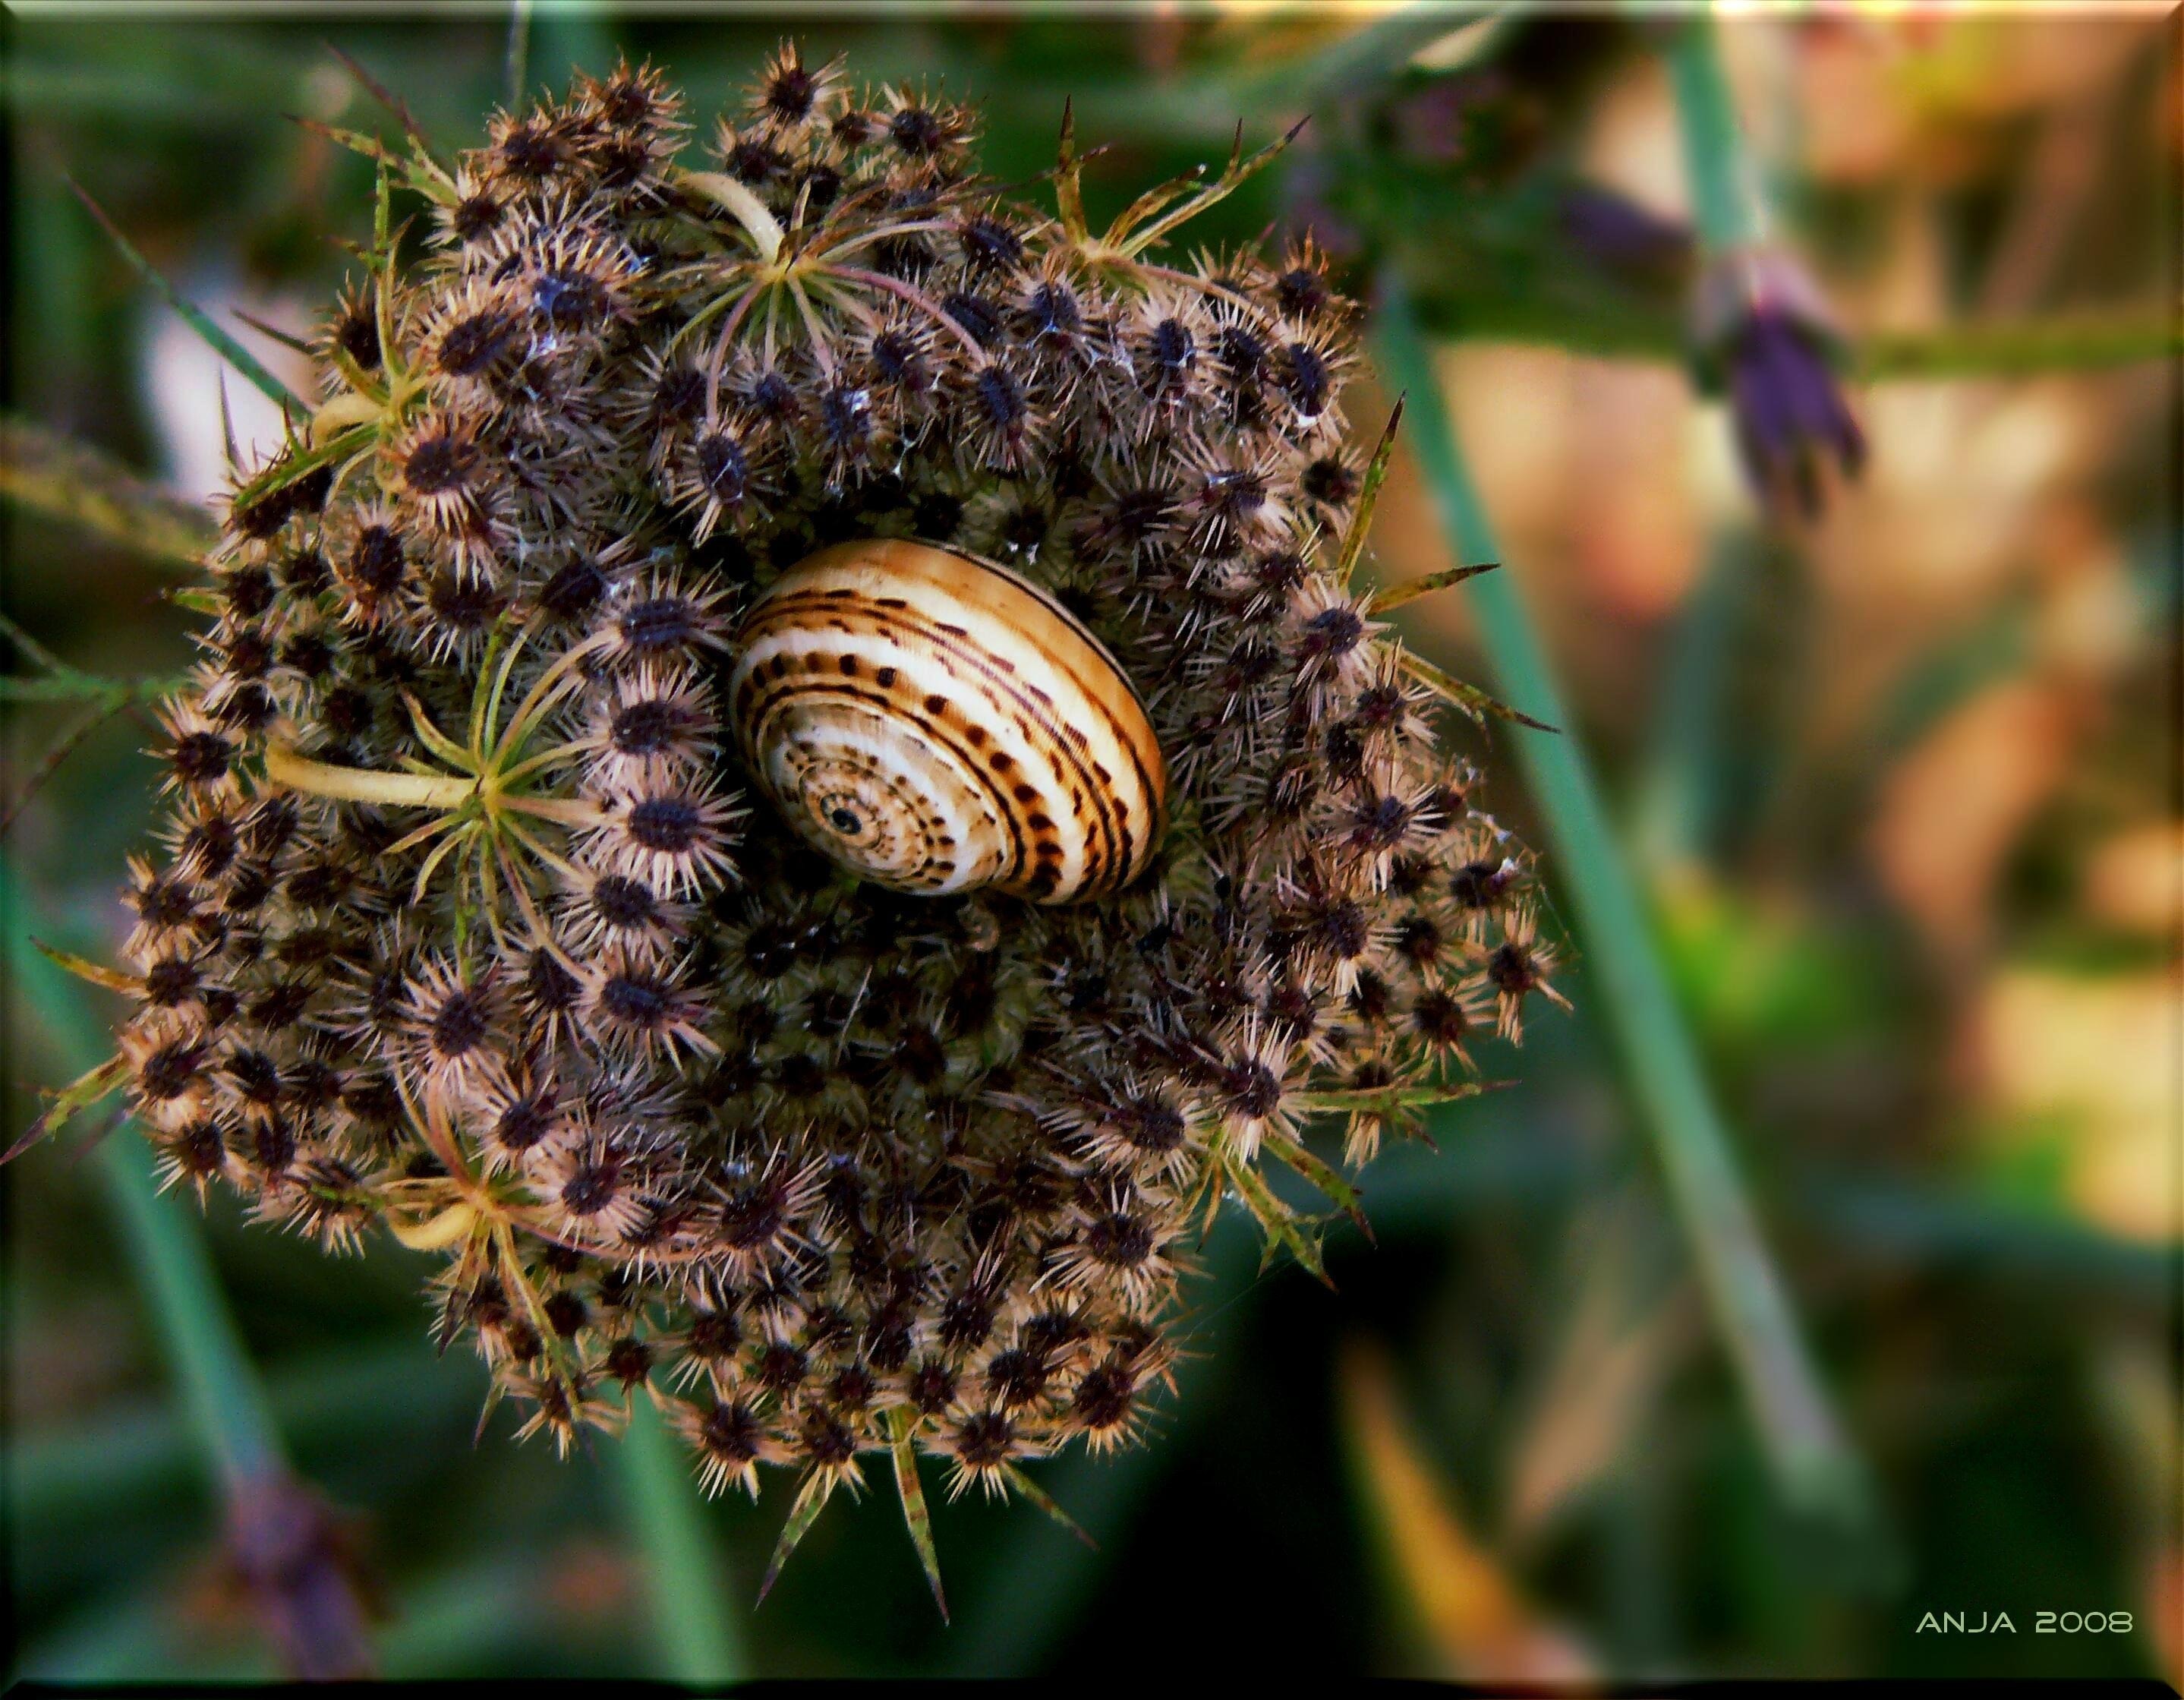 white and brown snail shell on black flower in closeup photography